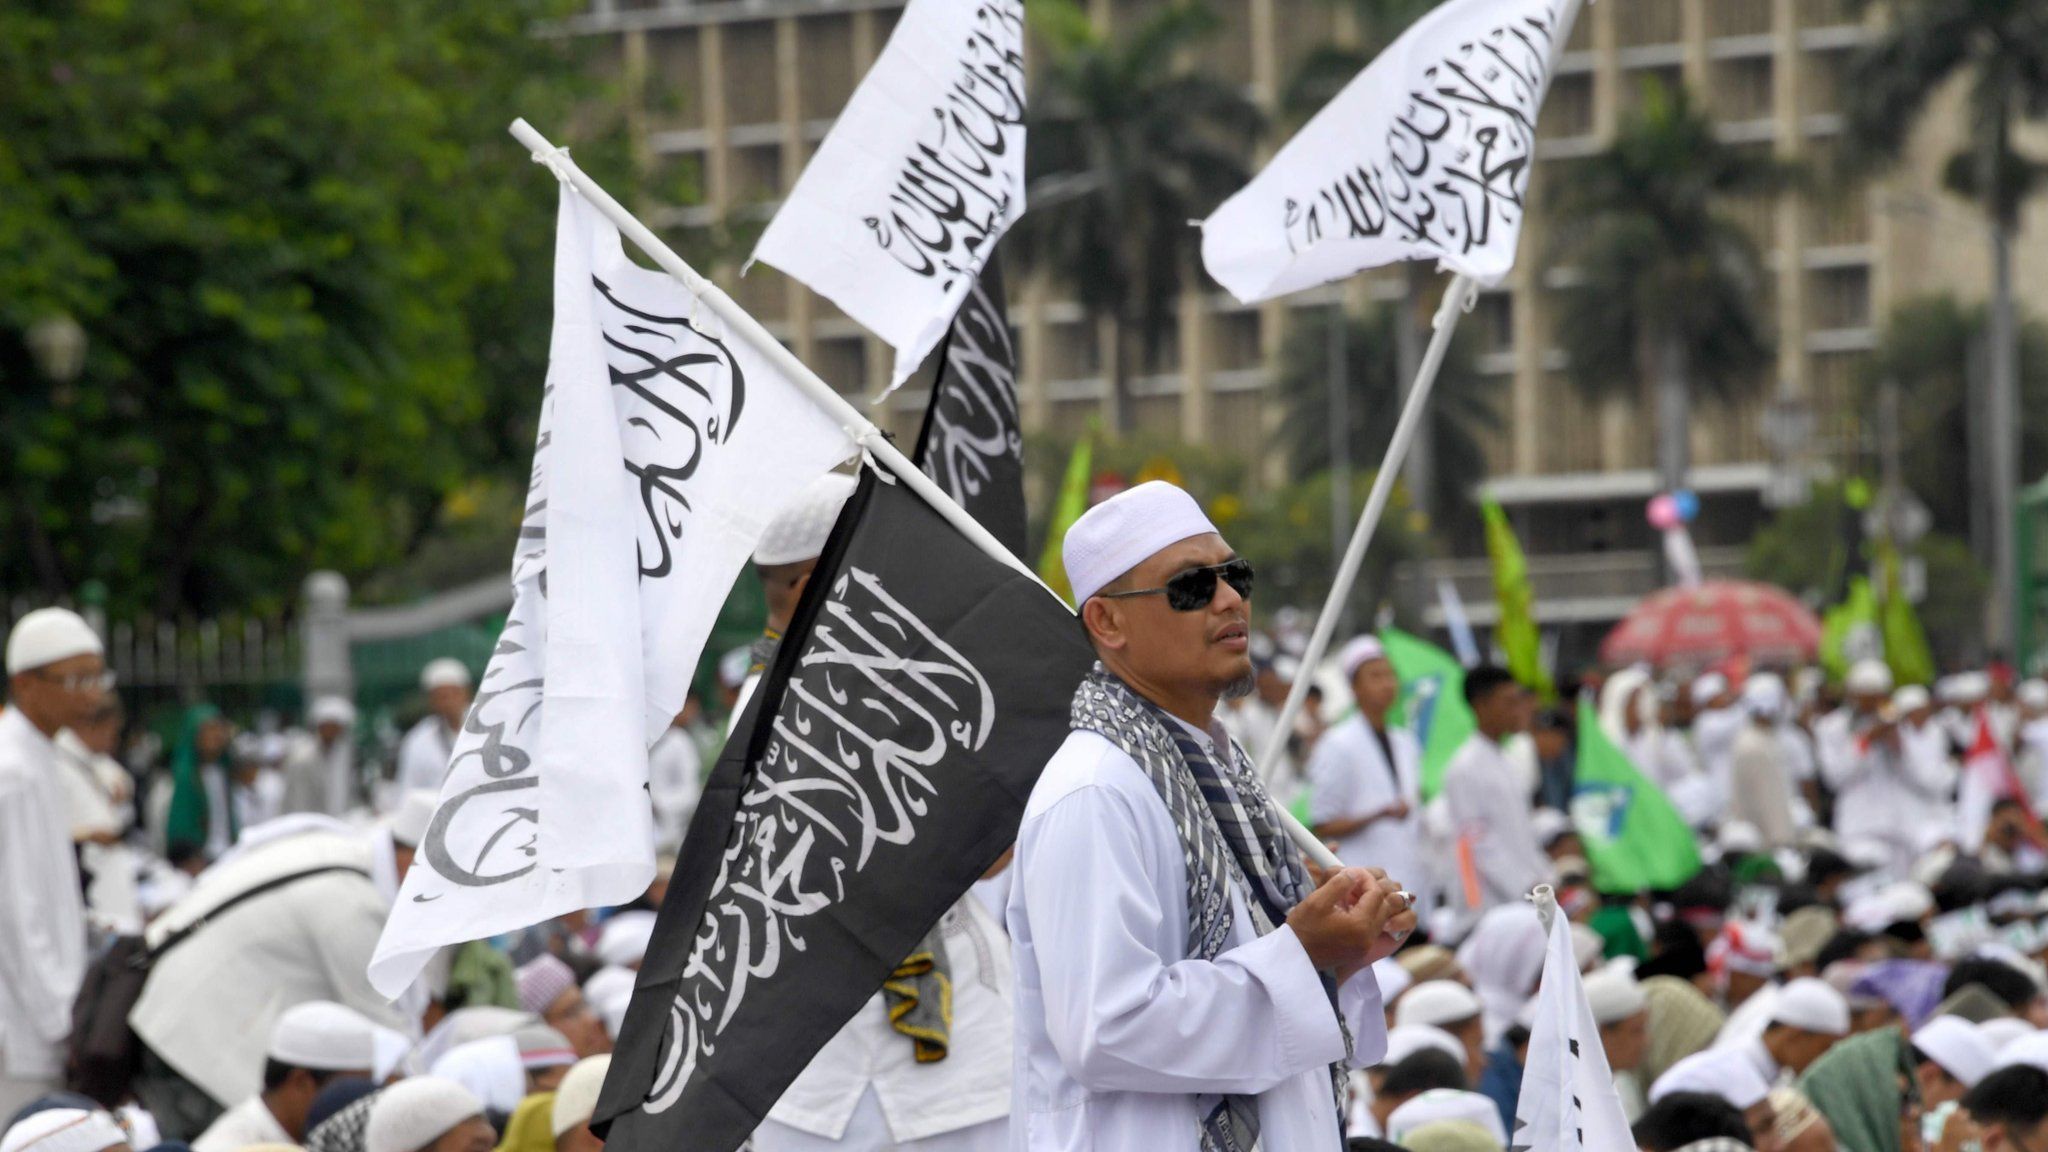 Indonesians in white Islamic robes gathered at Jakarta's National Monument park, with one standing and holding flags with Koranic verses on them. 2 December 2016.